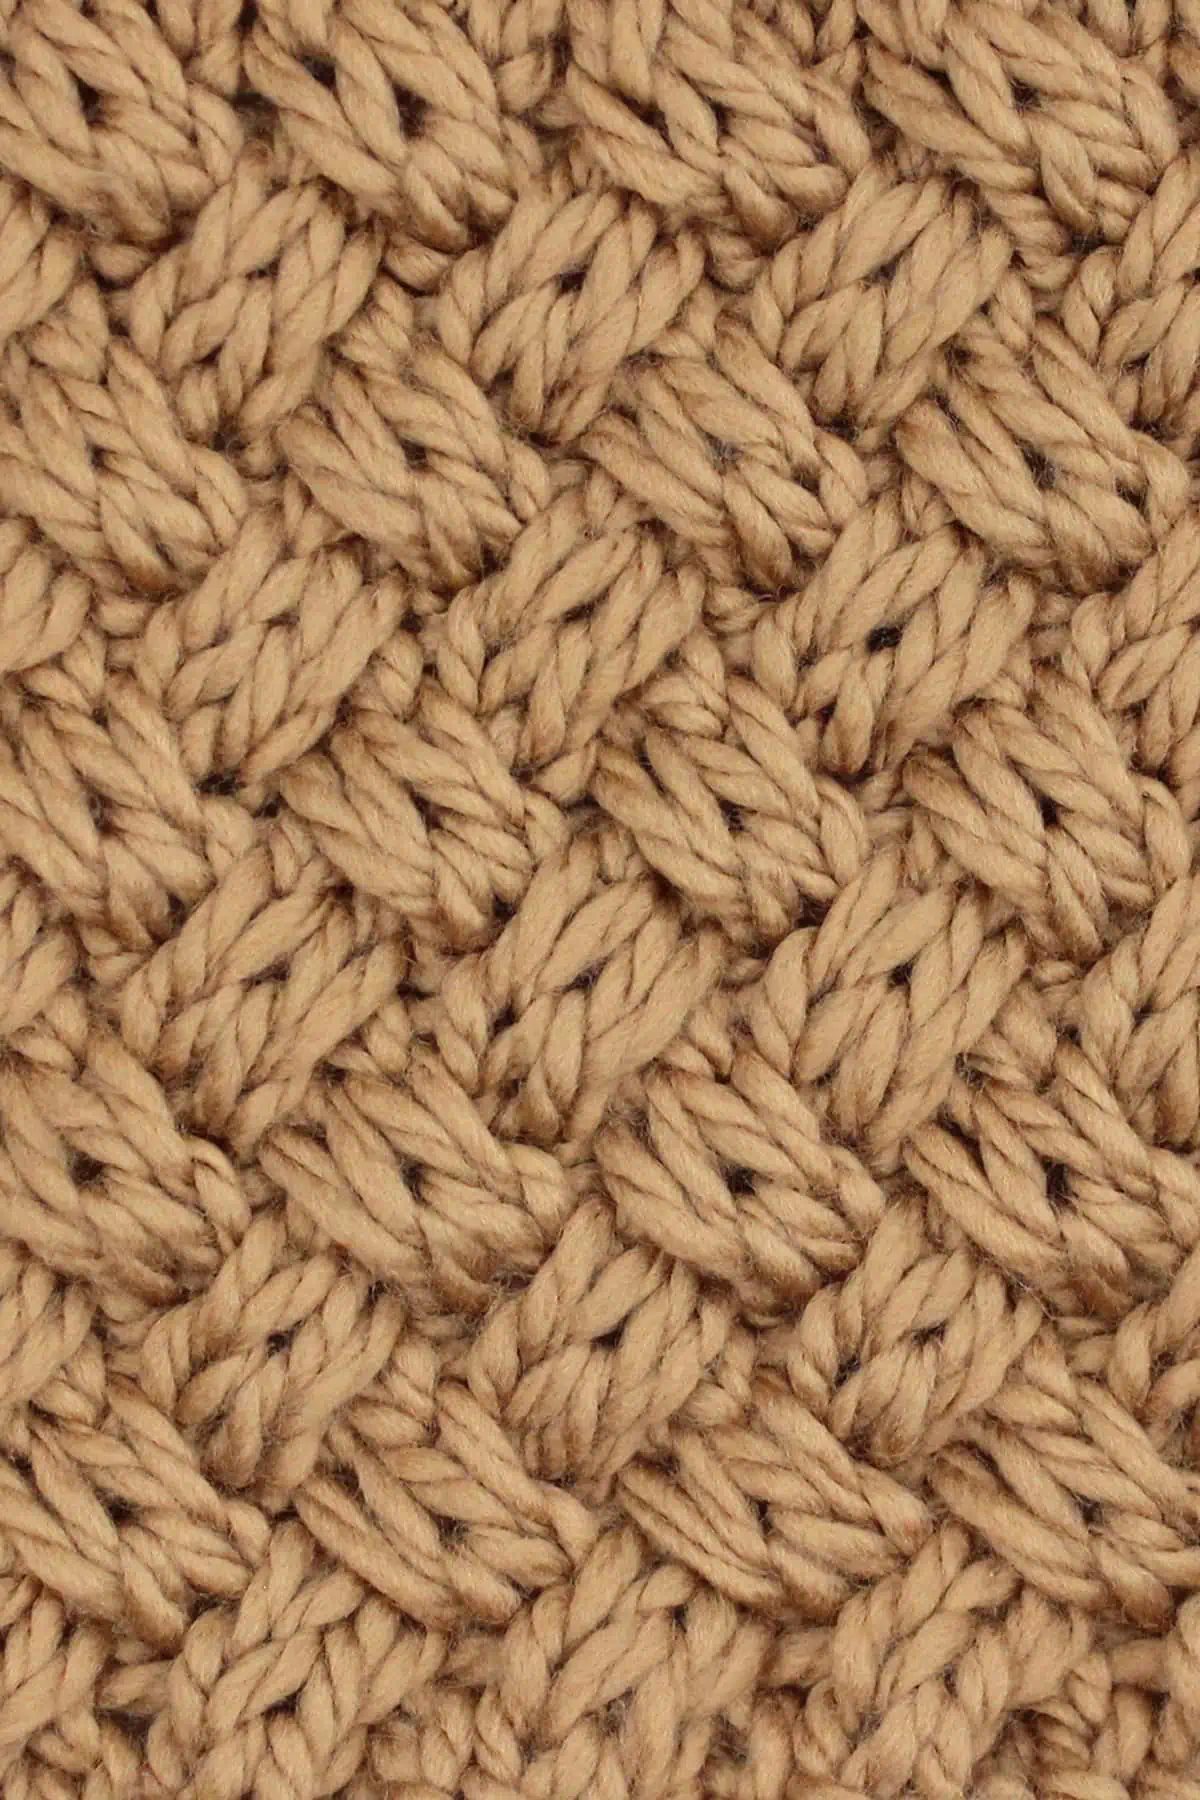 Diagonal Basket Weave Cable Stitch Knit Stitch Pattern in brown-colored yarn.